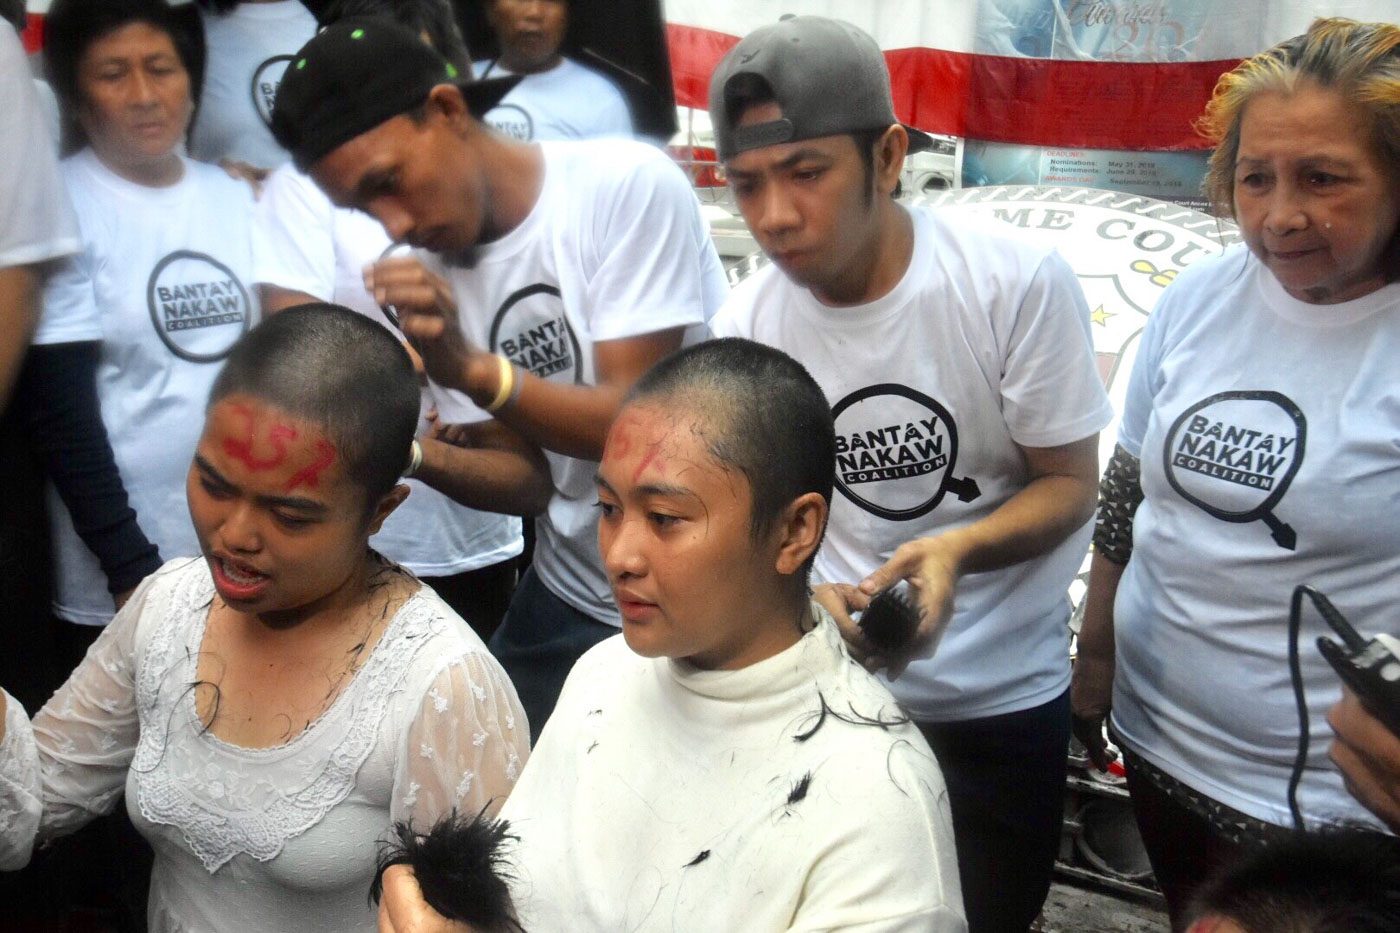 LOOK: Men, women shave heads to call for 25% shading threshold in VP race